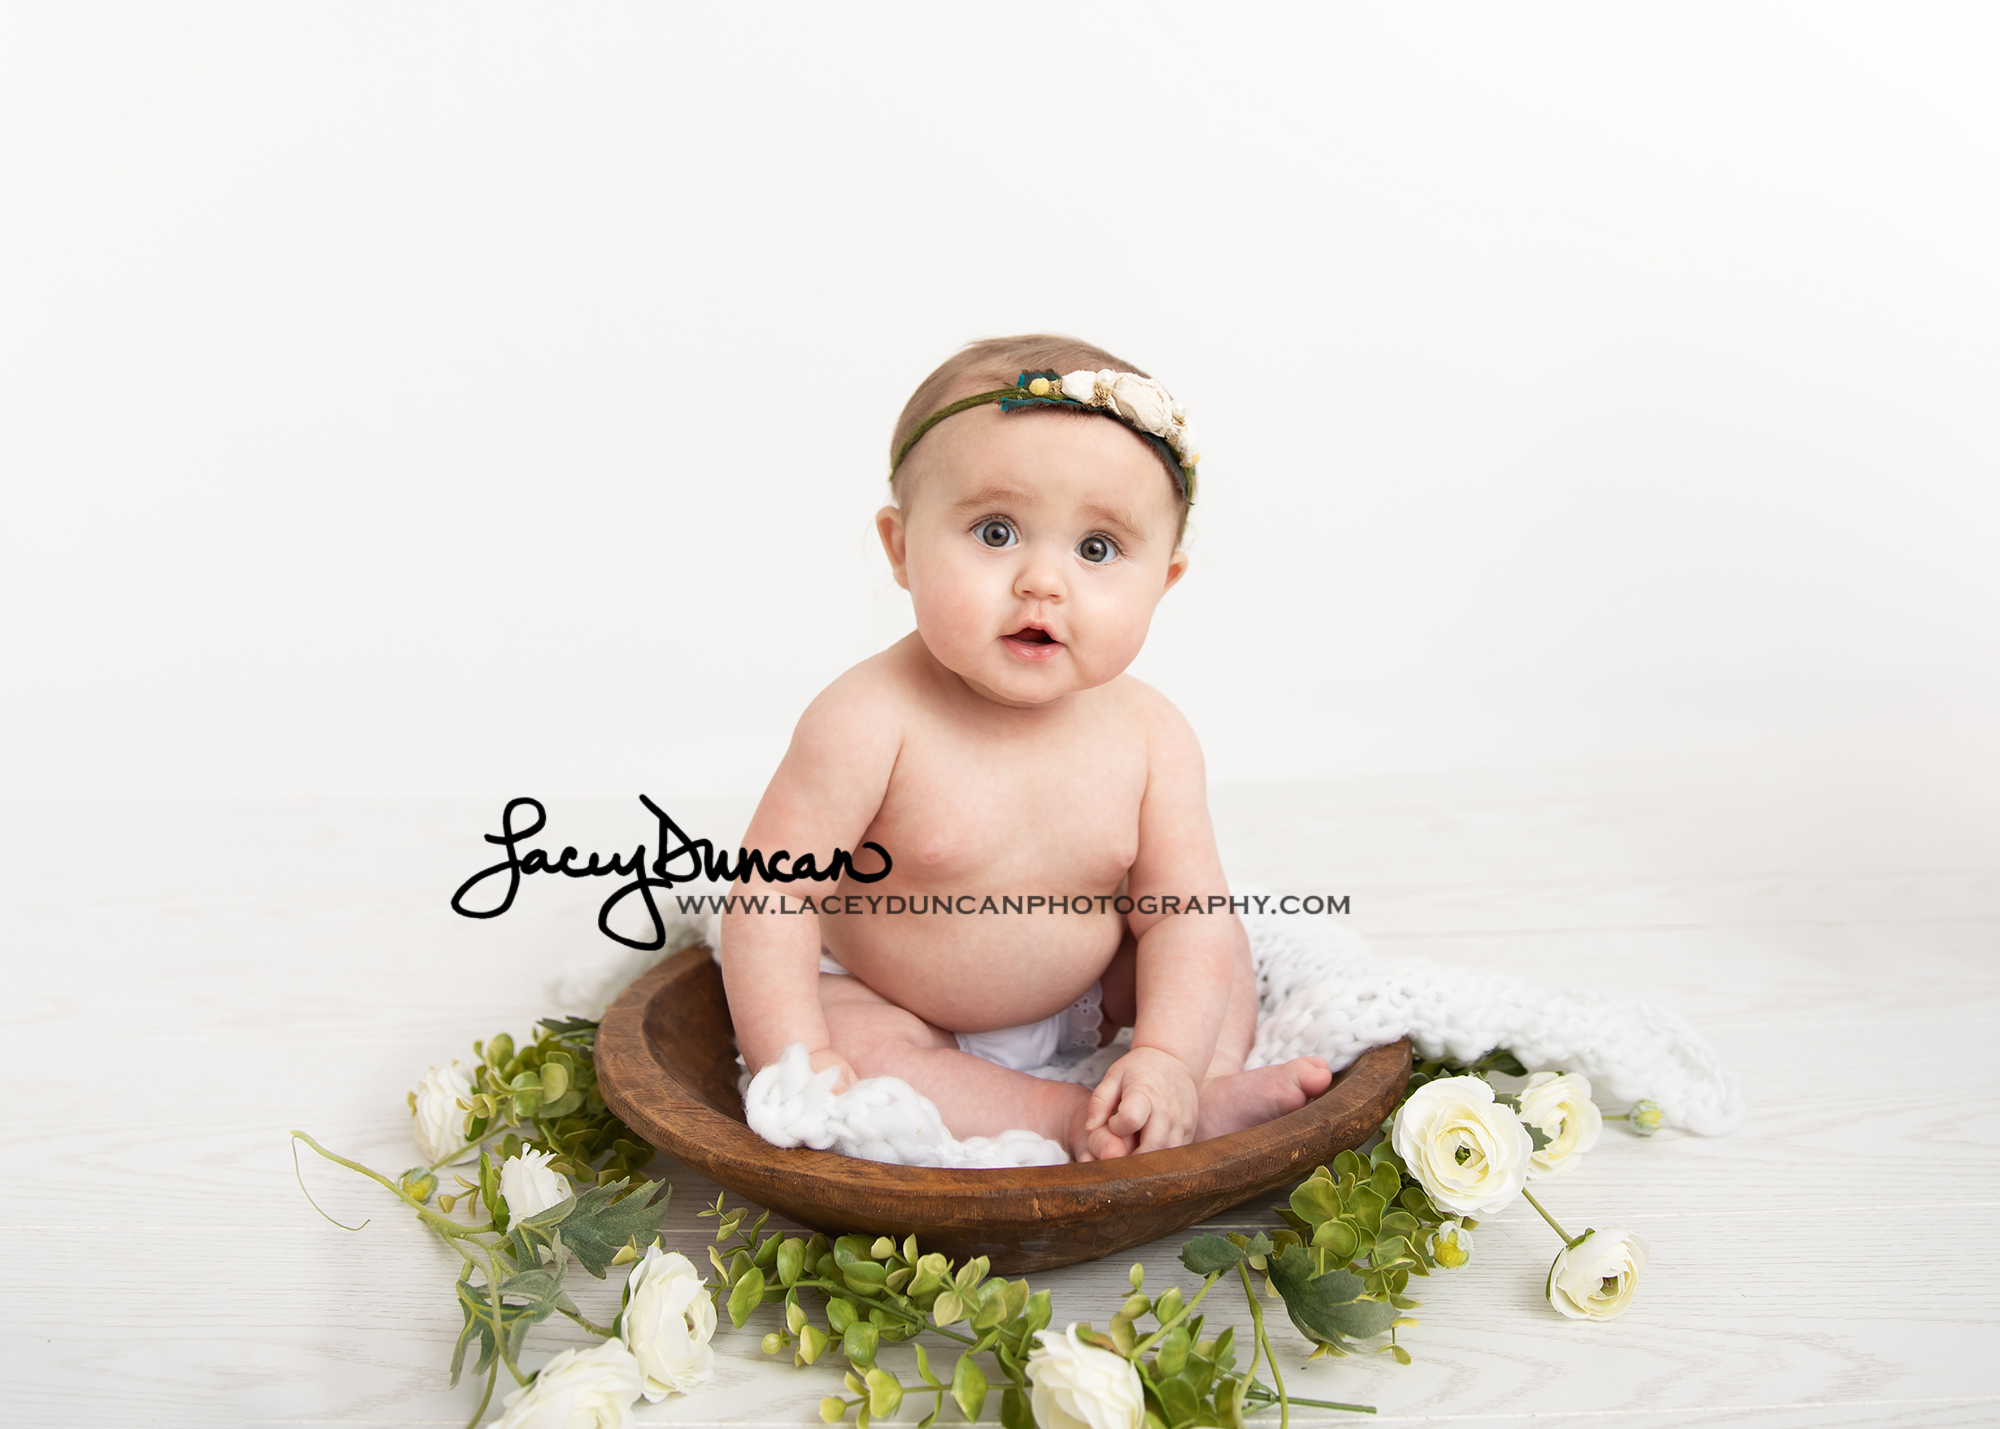 Baby S Grows Up | Little Rock Baby Photographer